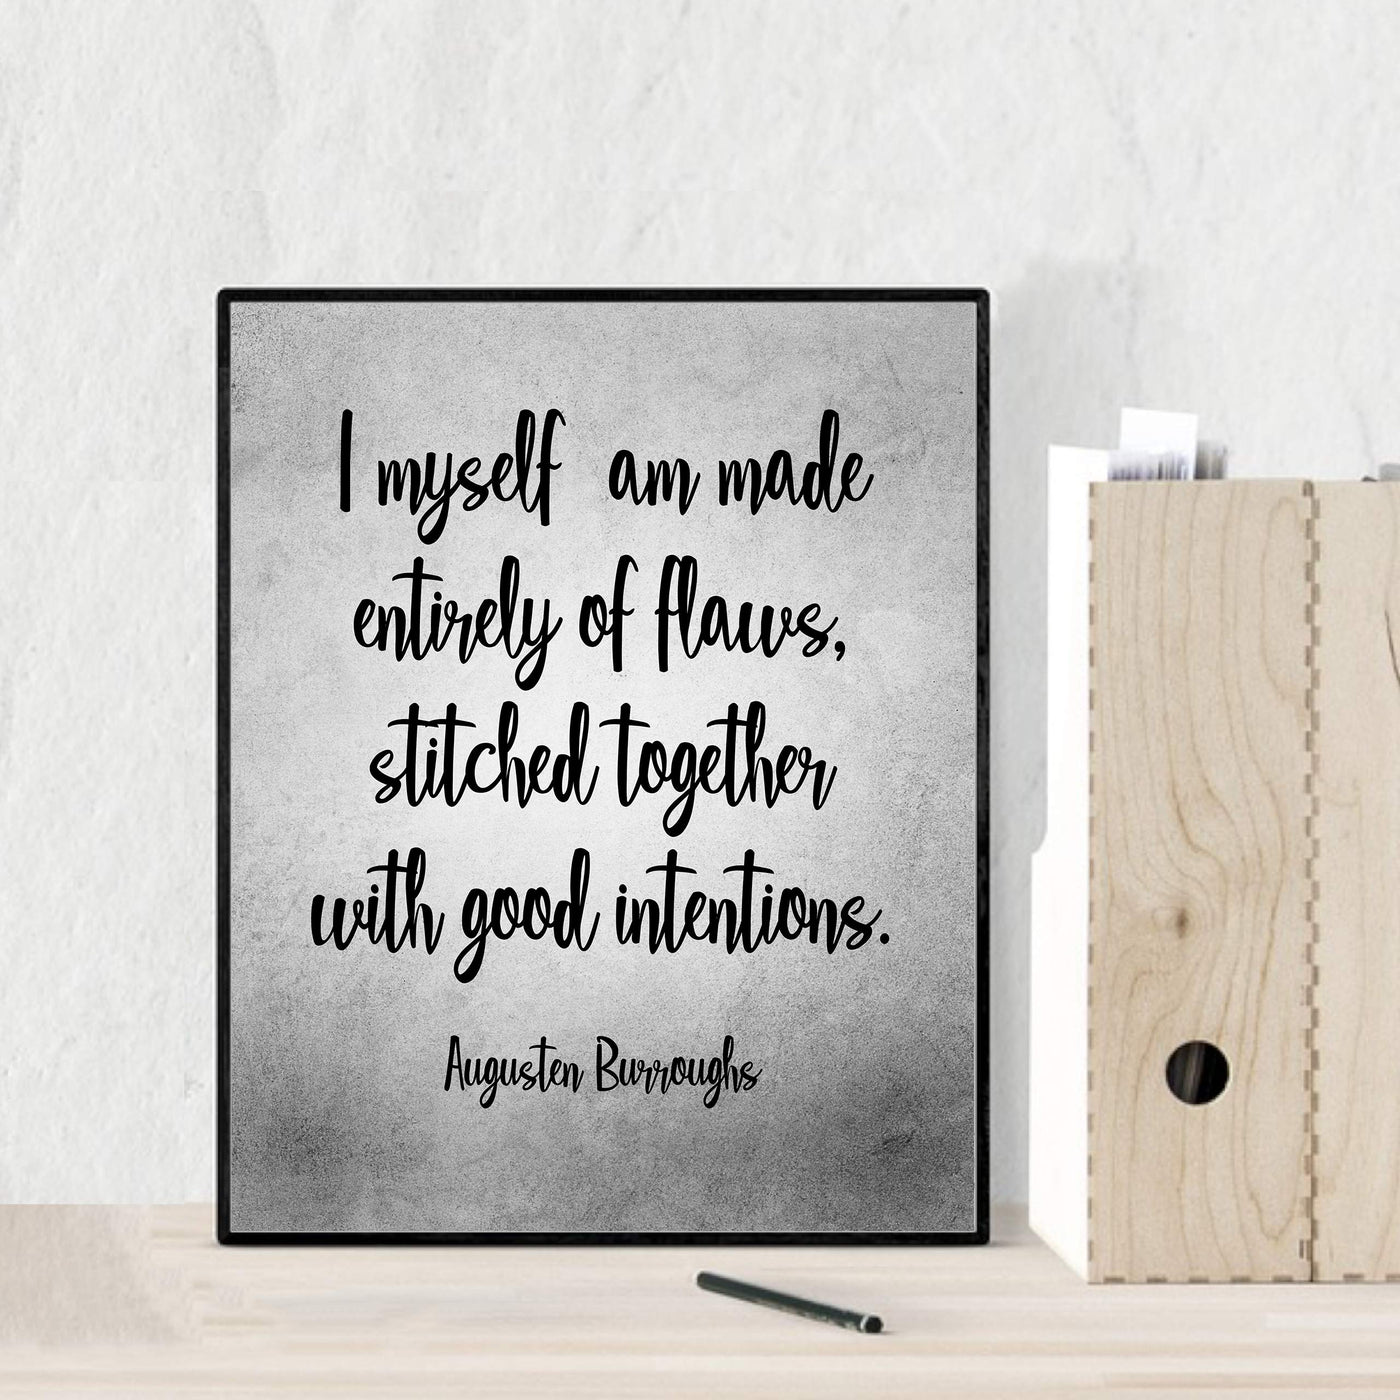 Augusten Burroughs-"I Myself Am Made Entirely of Flaws" Inspirational Life Quotes-8 x 10" Motivational Typographic Wall Art Print-Ready to Frame. Home-Office-Studio-Dorm Decor. Great Literary Gift!